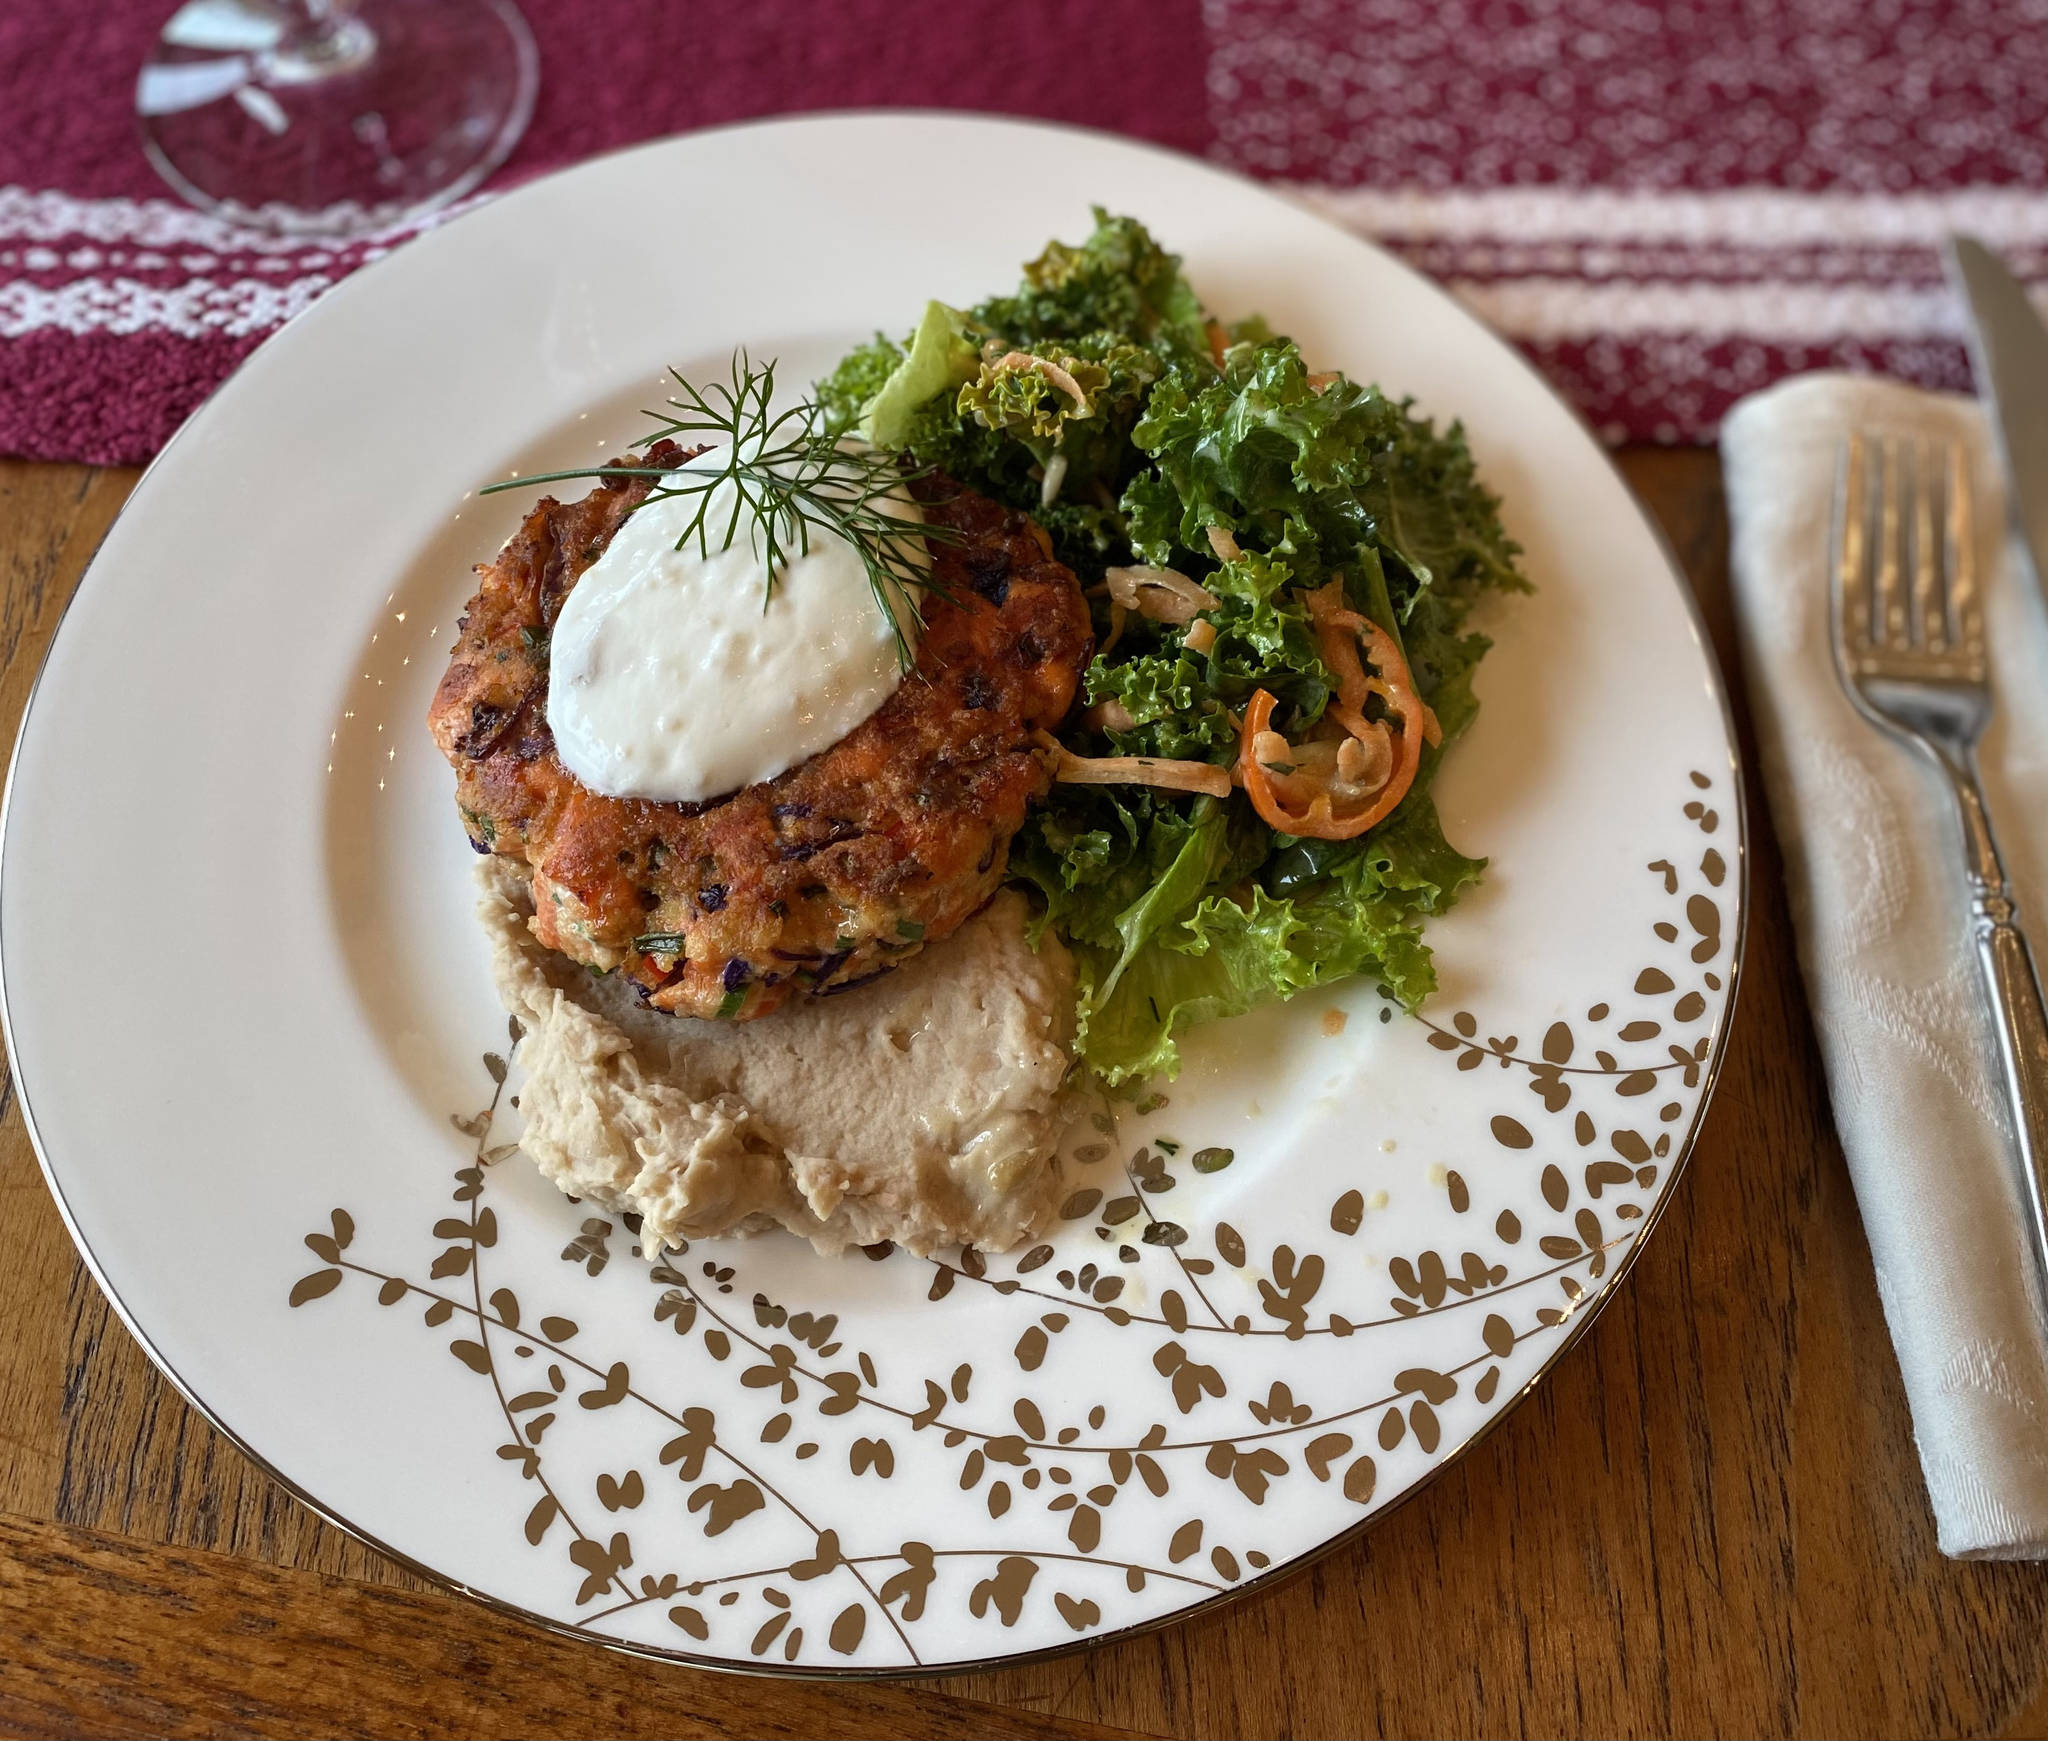 Bell pepper, cabbage and onions add flavor and texture to this salmon cake recipe. (Photo by Tress Dale/Peninsula Clarion)